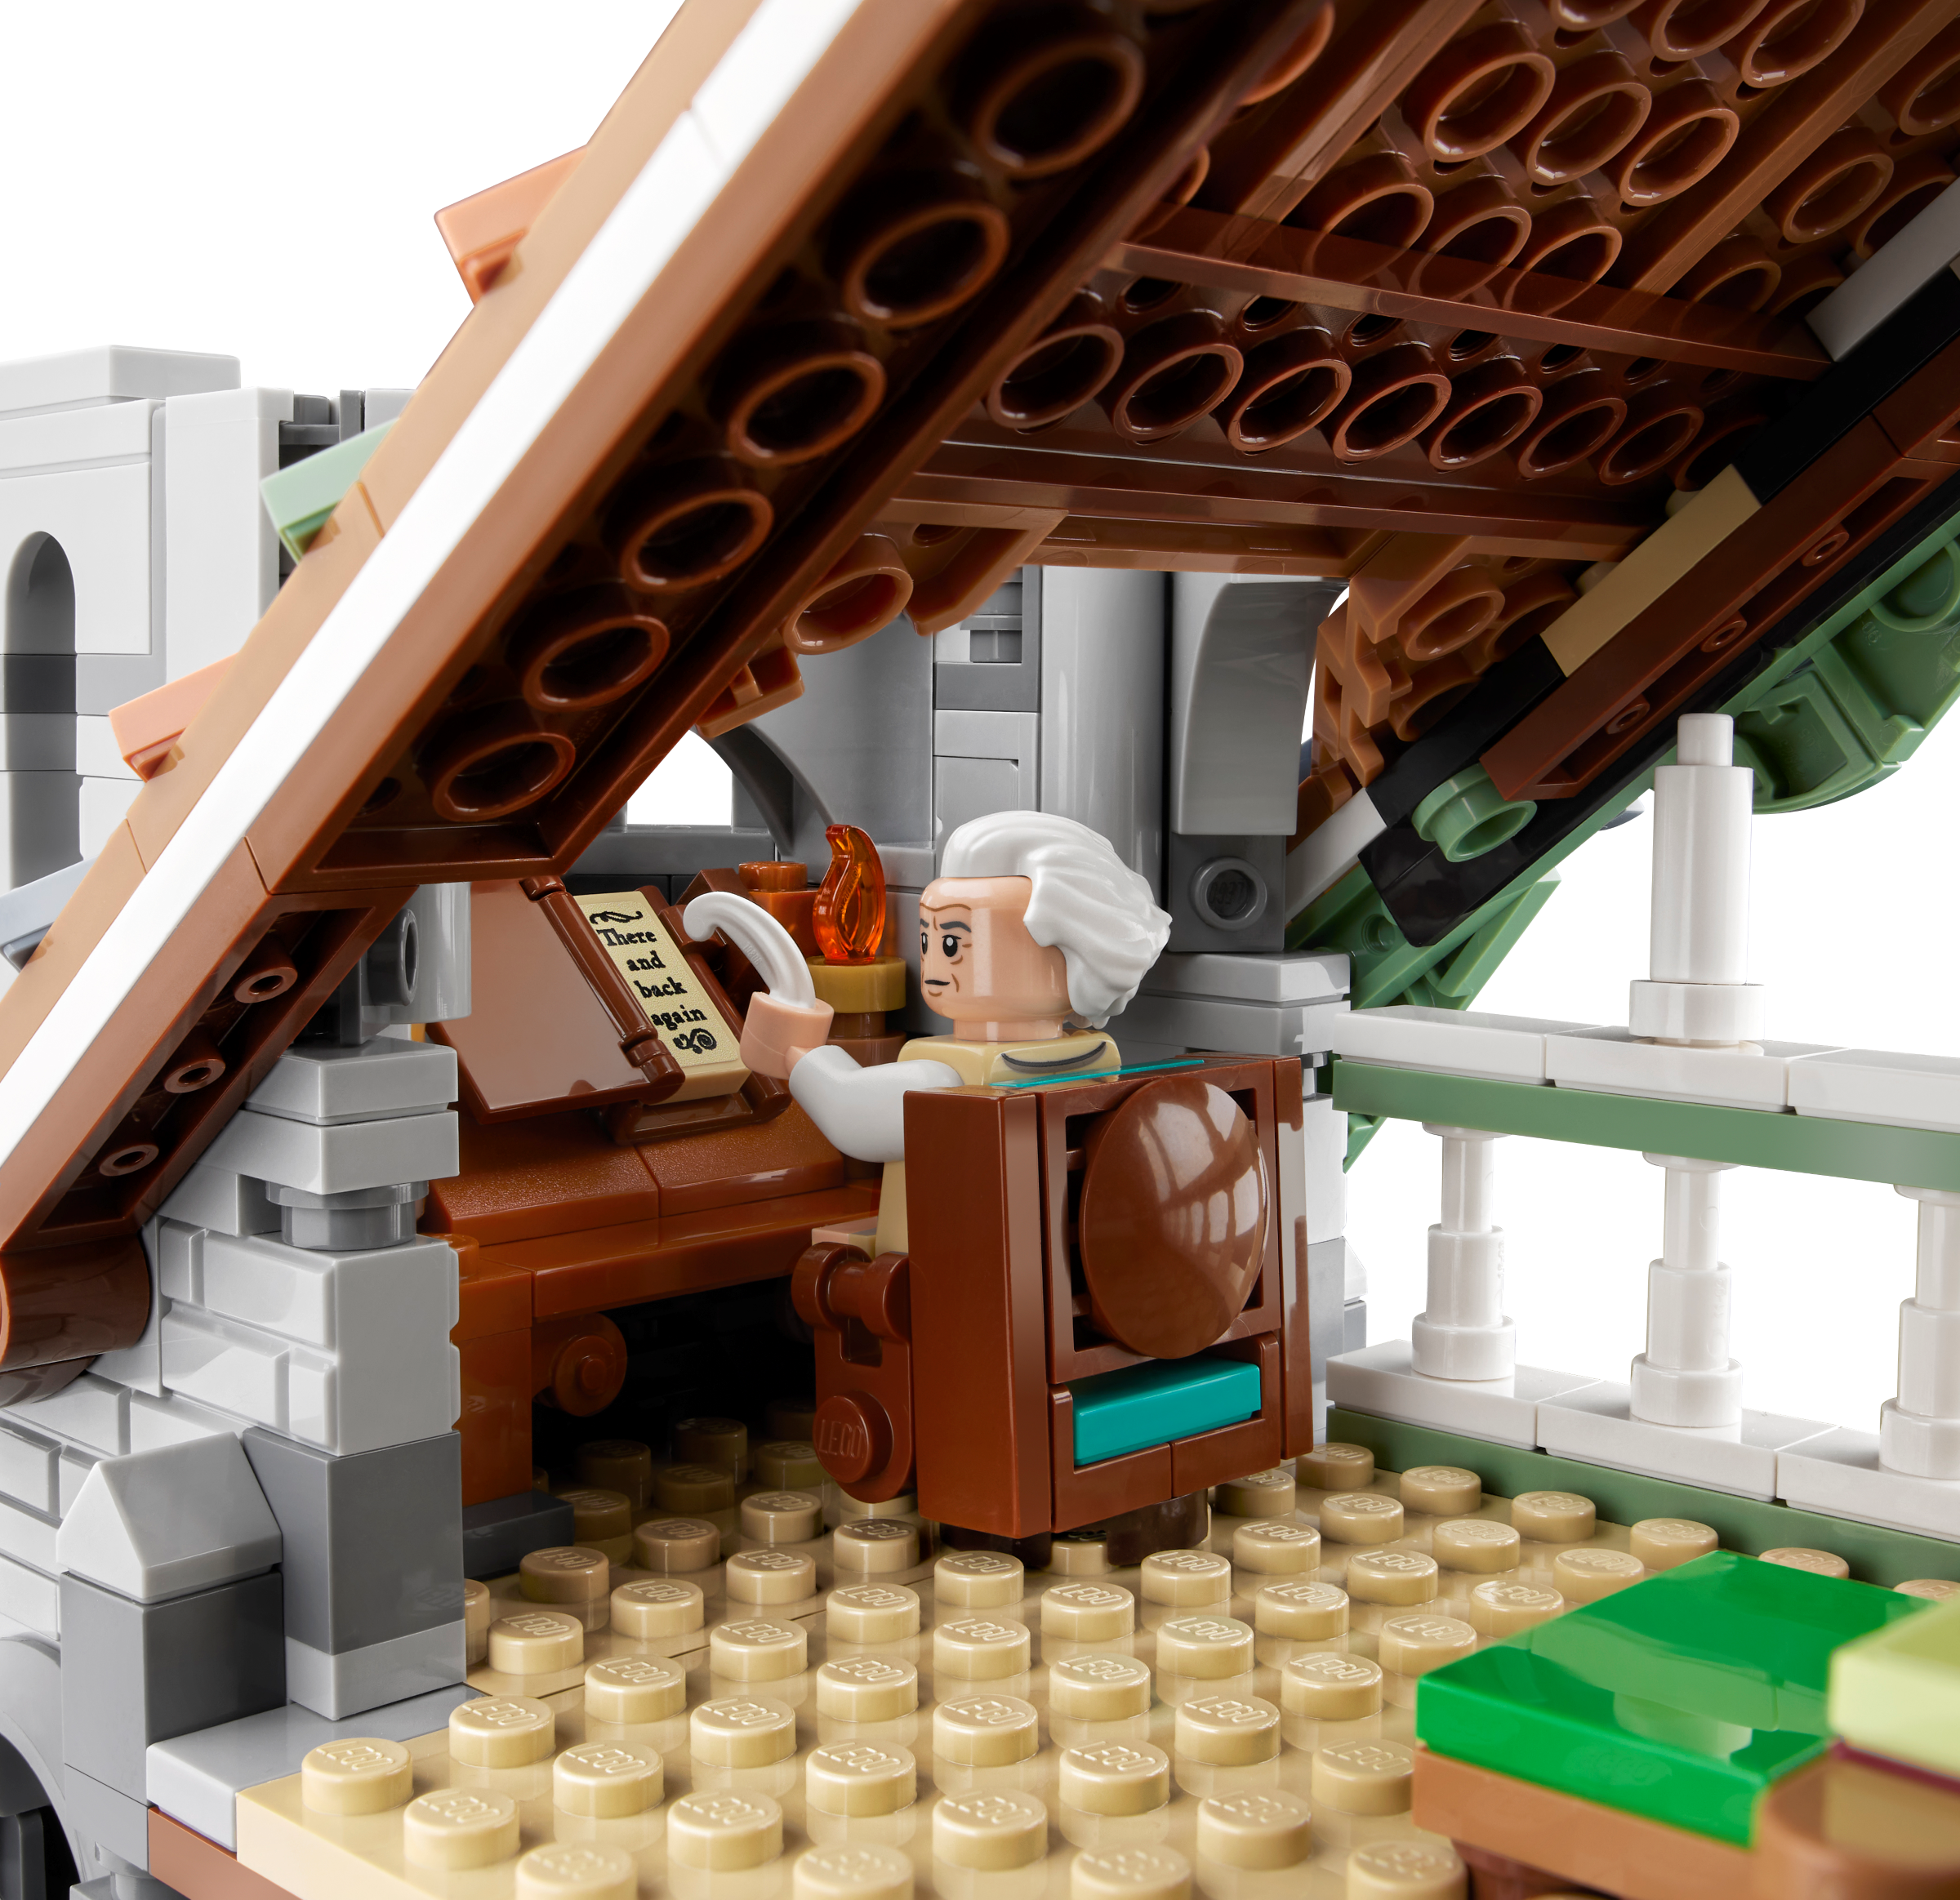 We Build LEGO The Lord of the Rings: Rivendell, An Epic Tribute to